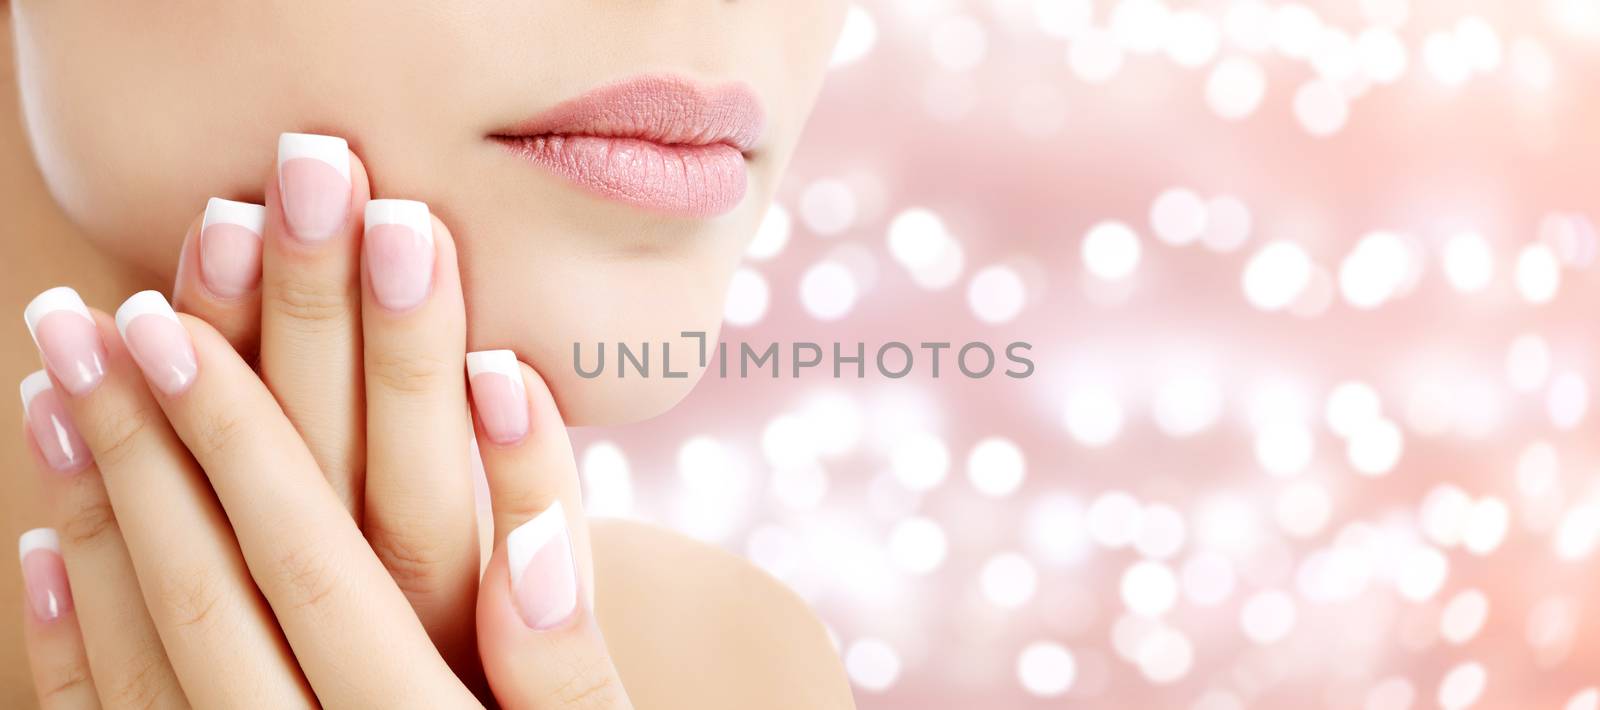 Beautiful young woman with healthy skin and french manicure on an abstract background with blurred lights